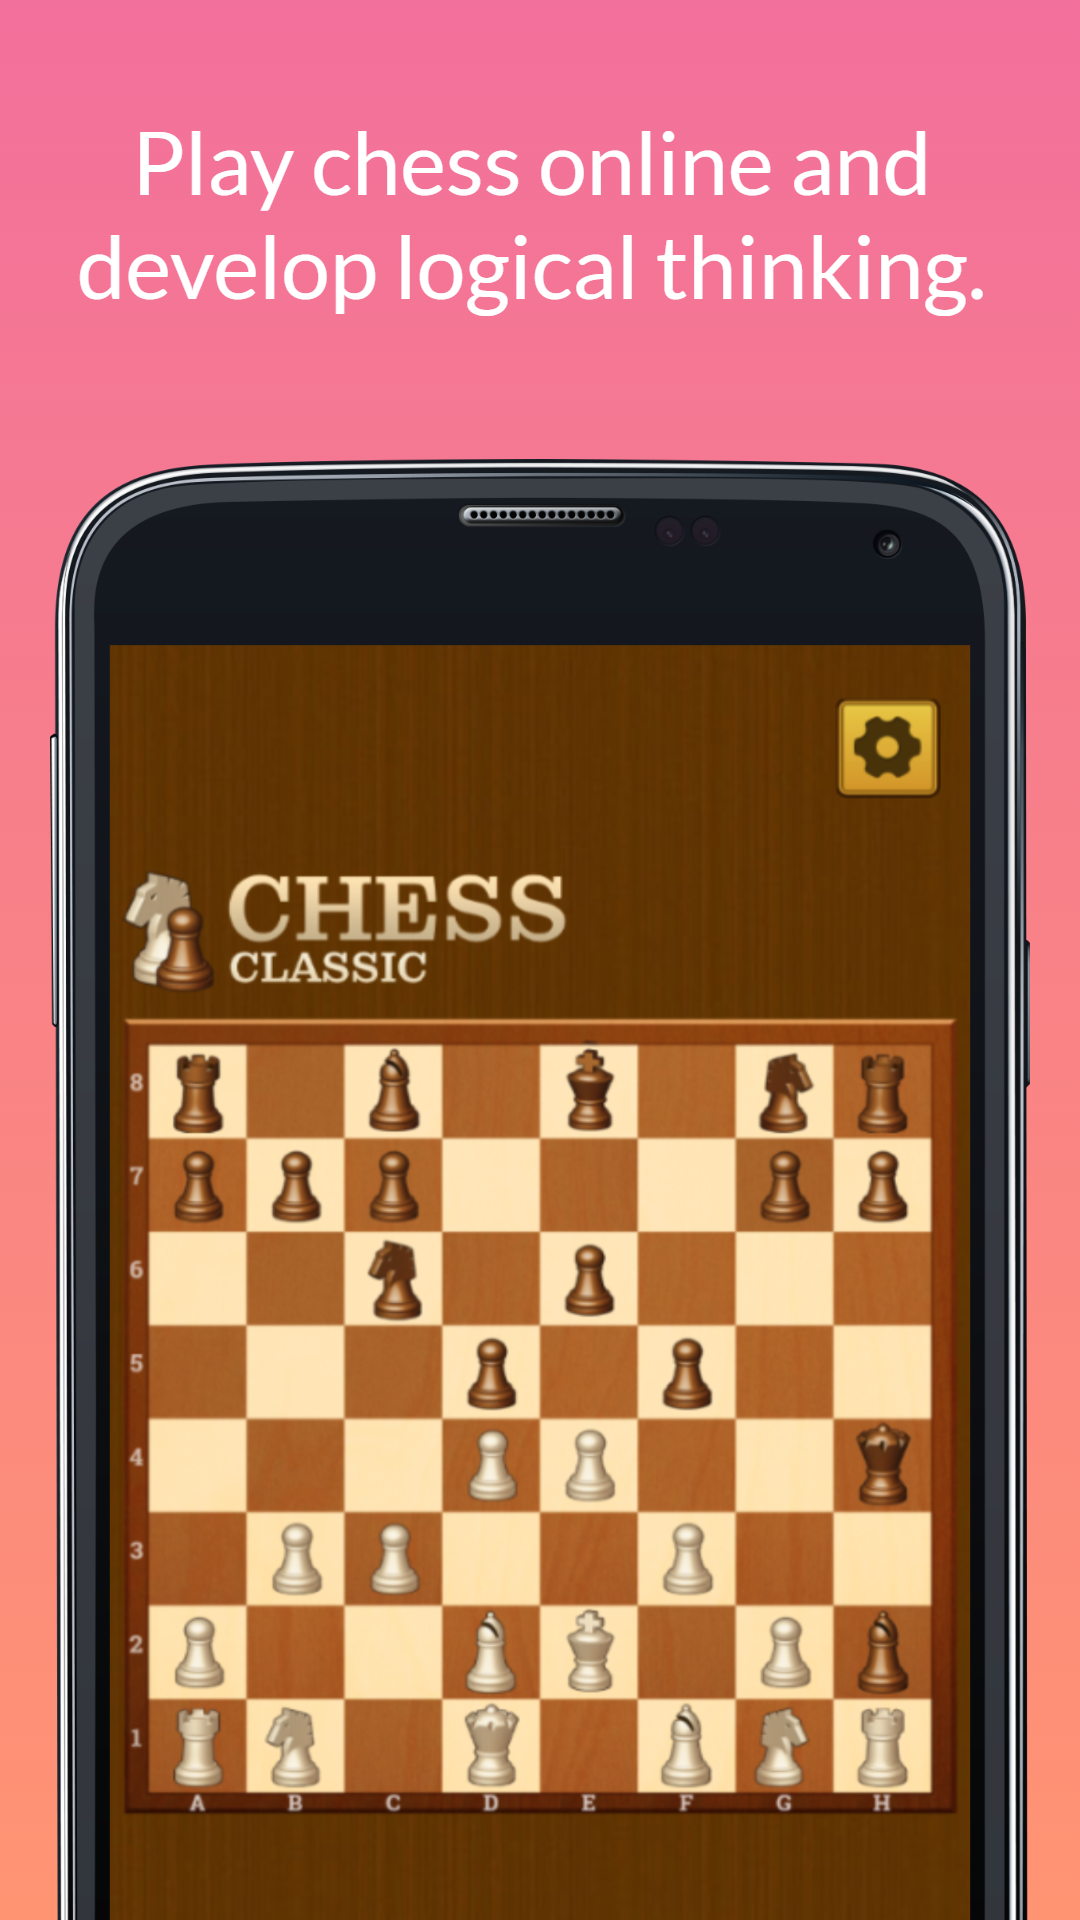 playchess.com Game for Android - Download